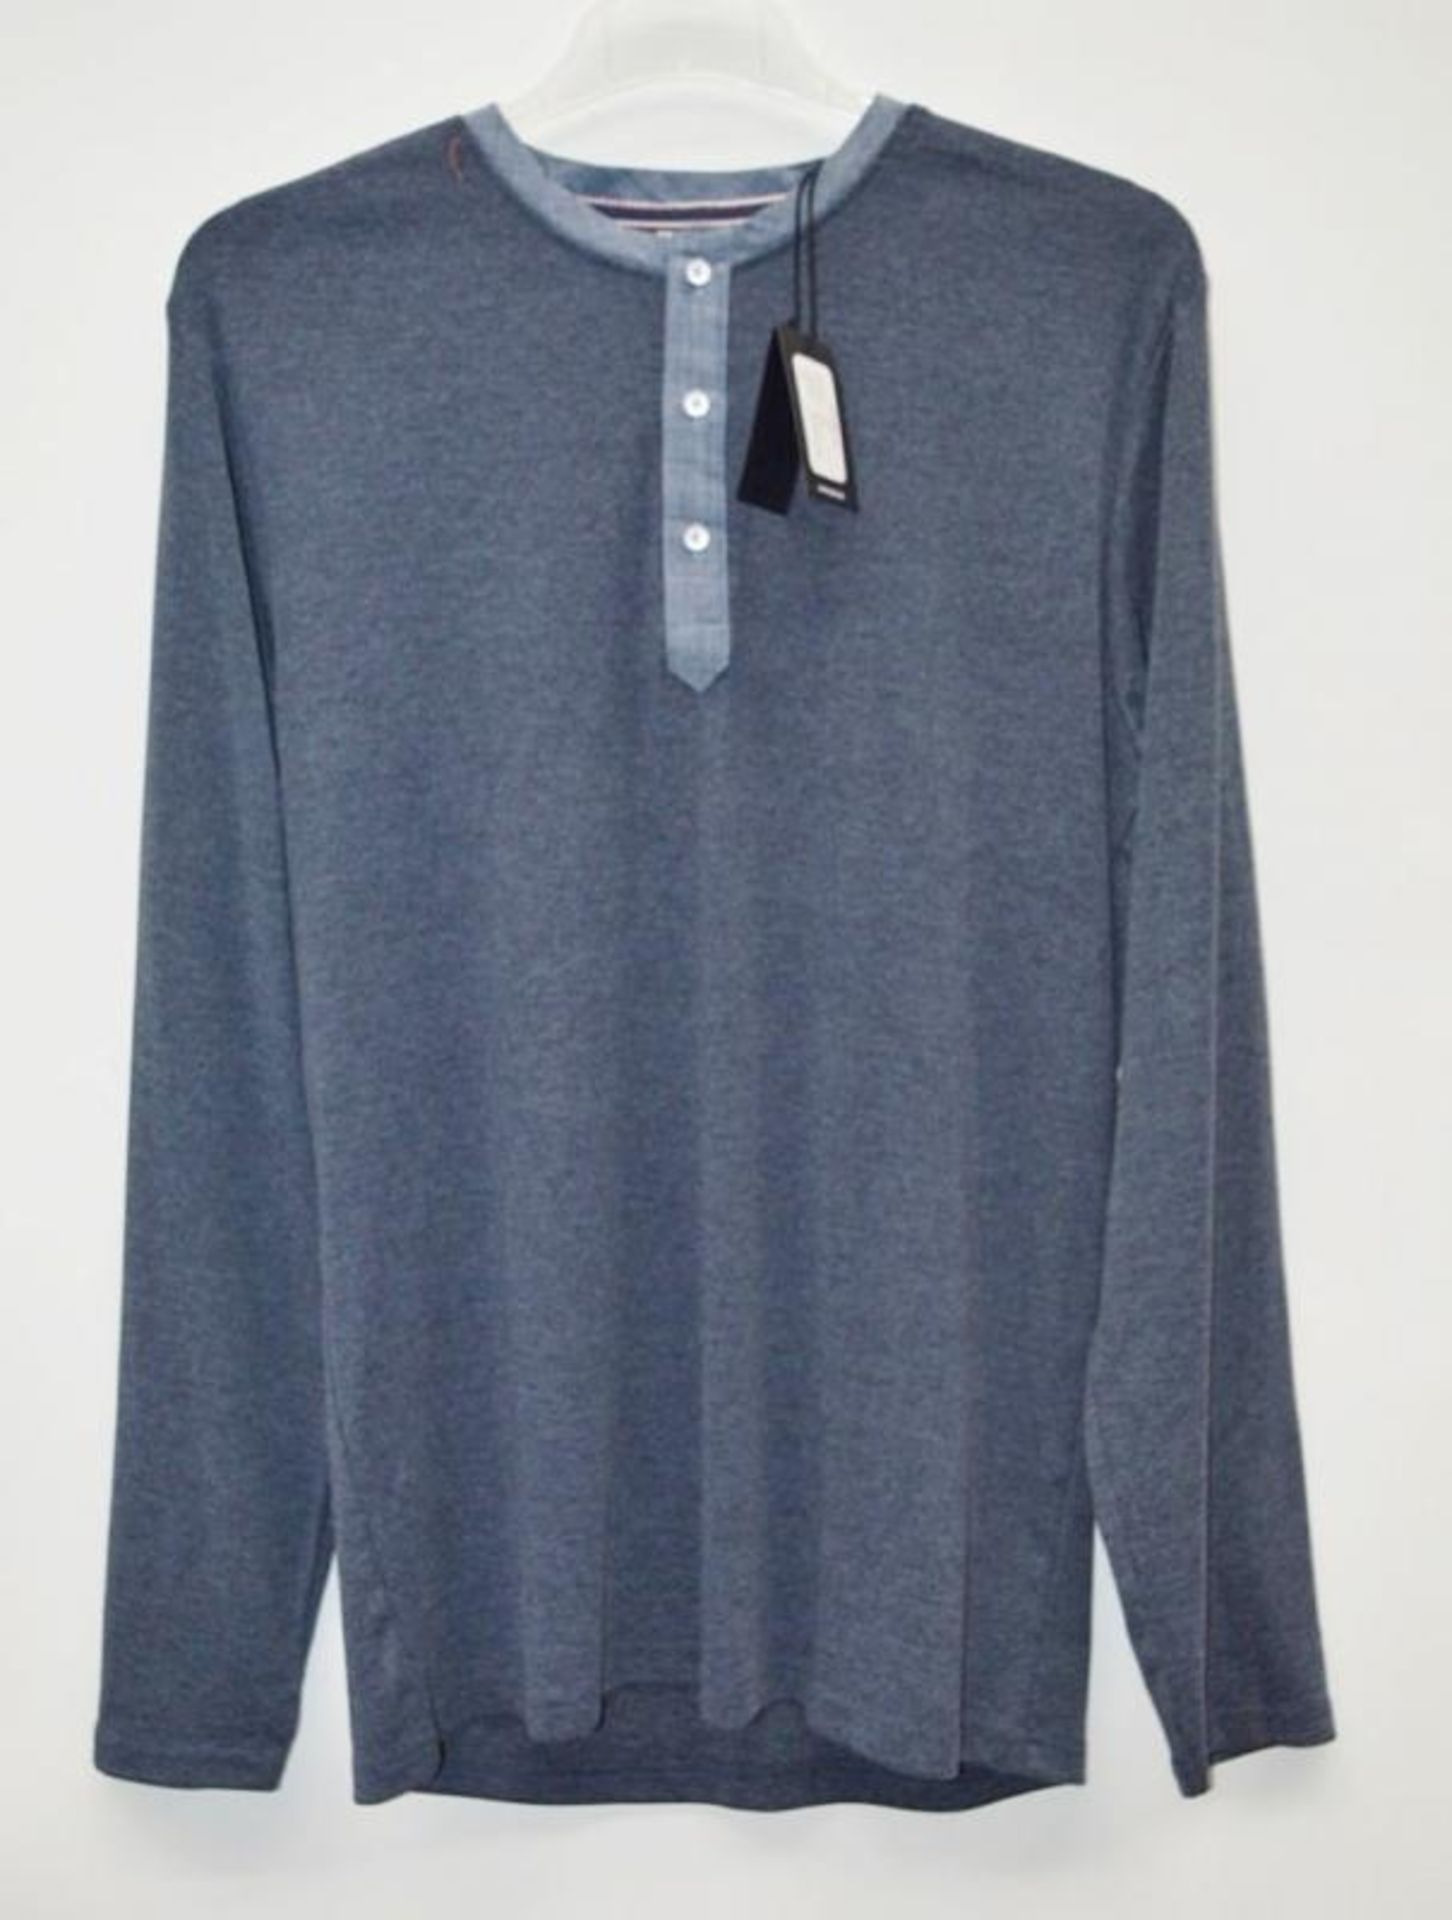 5 x Assorted PRE END Branded Mens Long Sleeve Tops - New Stock With Tags - Recent Retail Closure - - Image 8 of 8